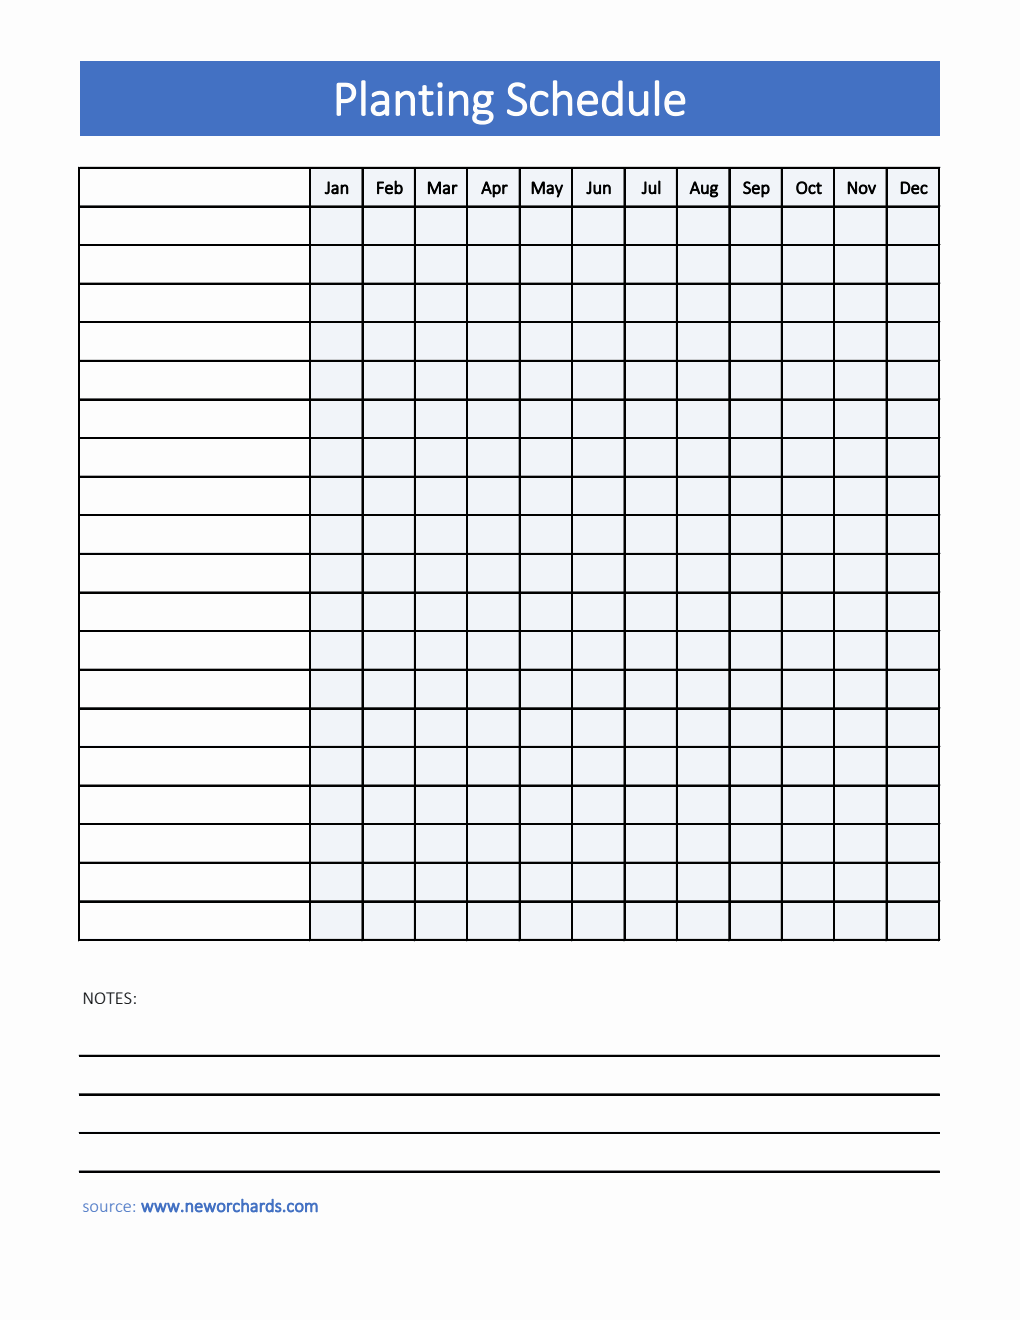  Planting Schedule Template - Excel